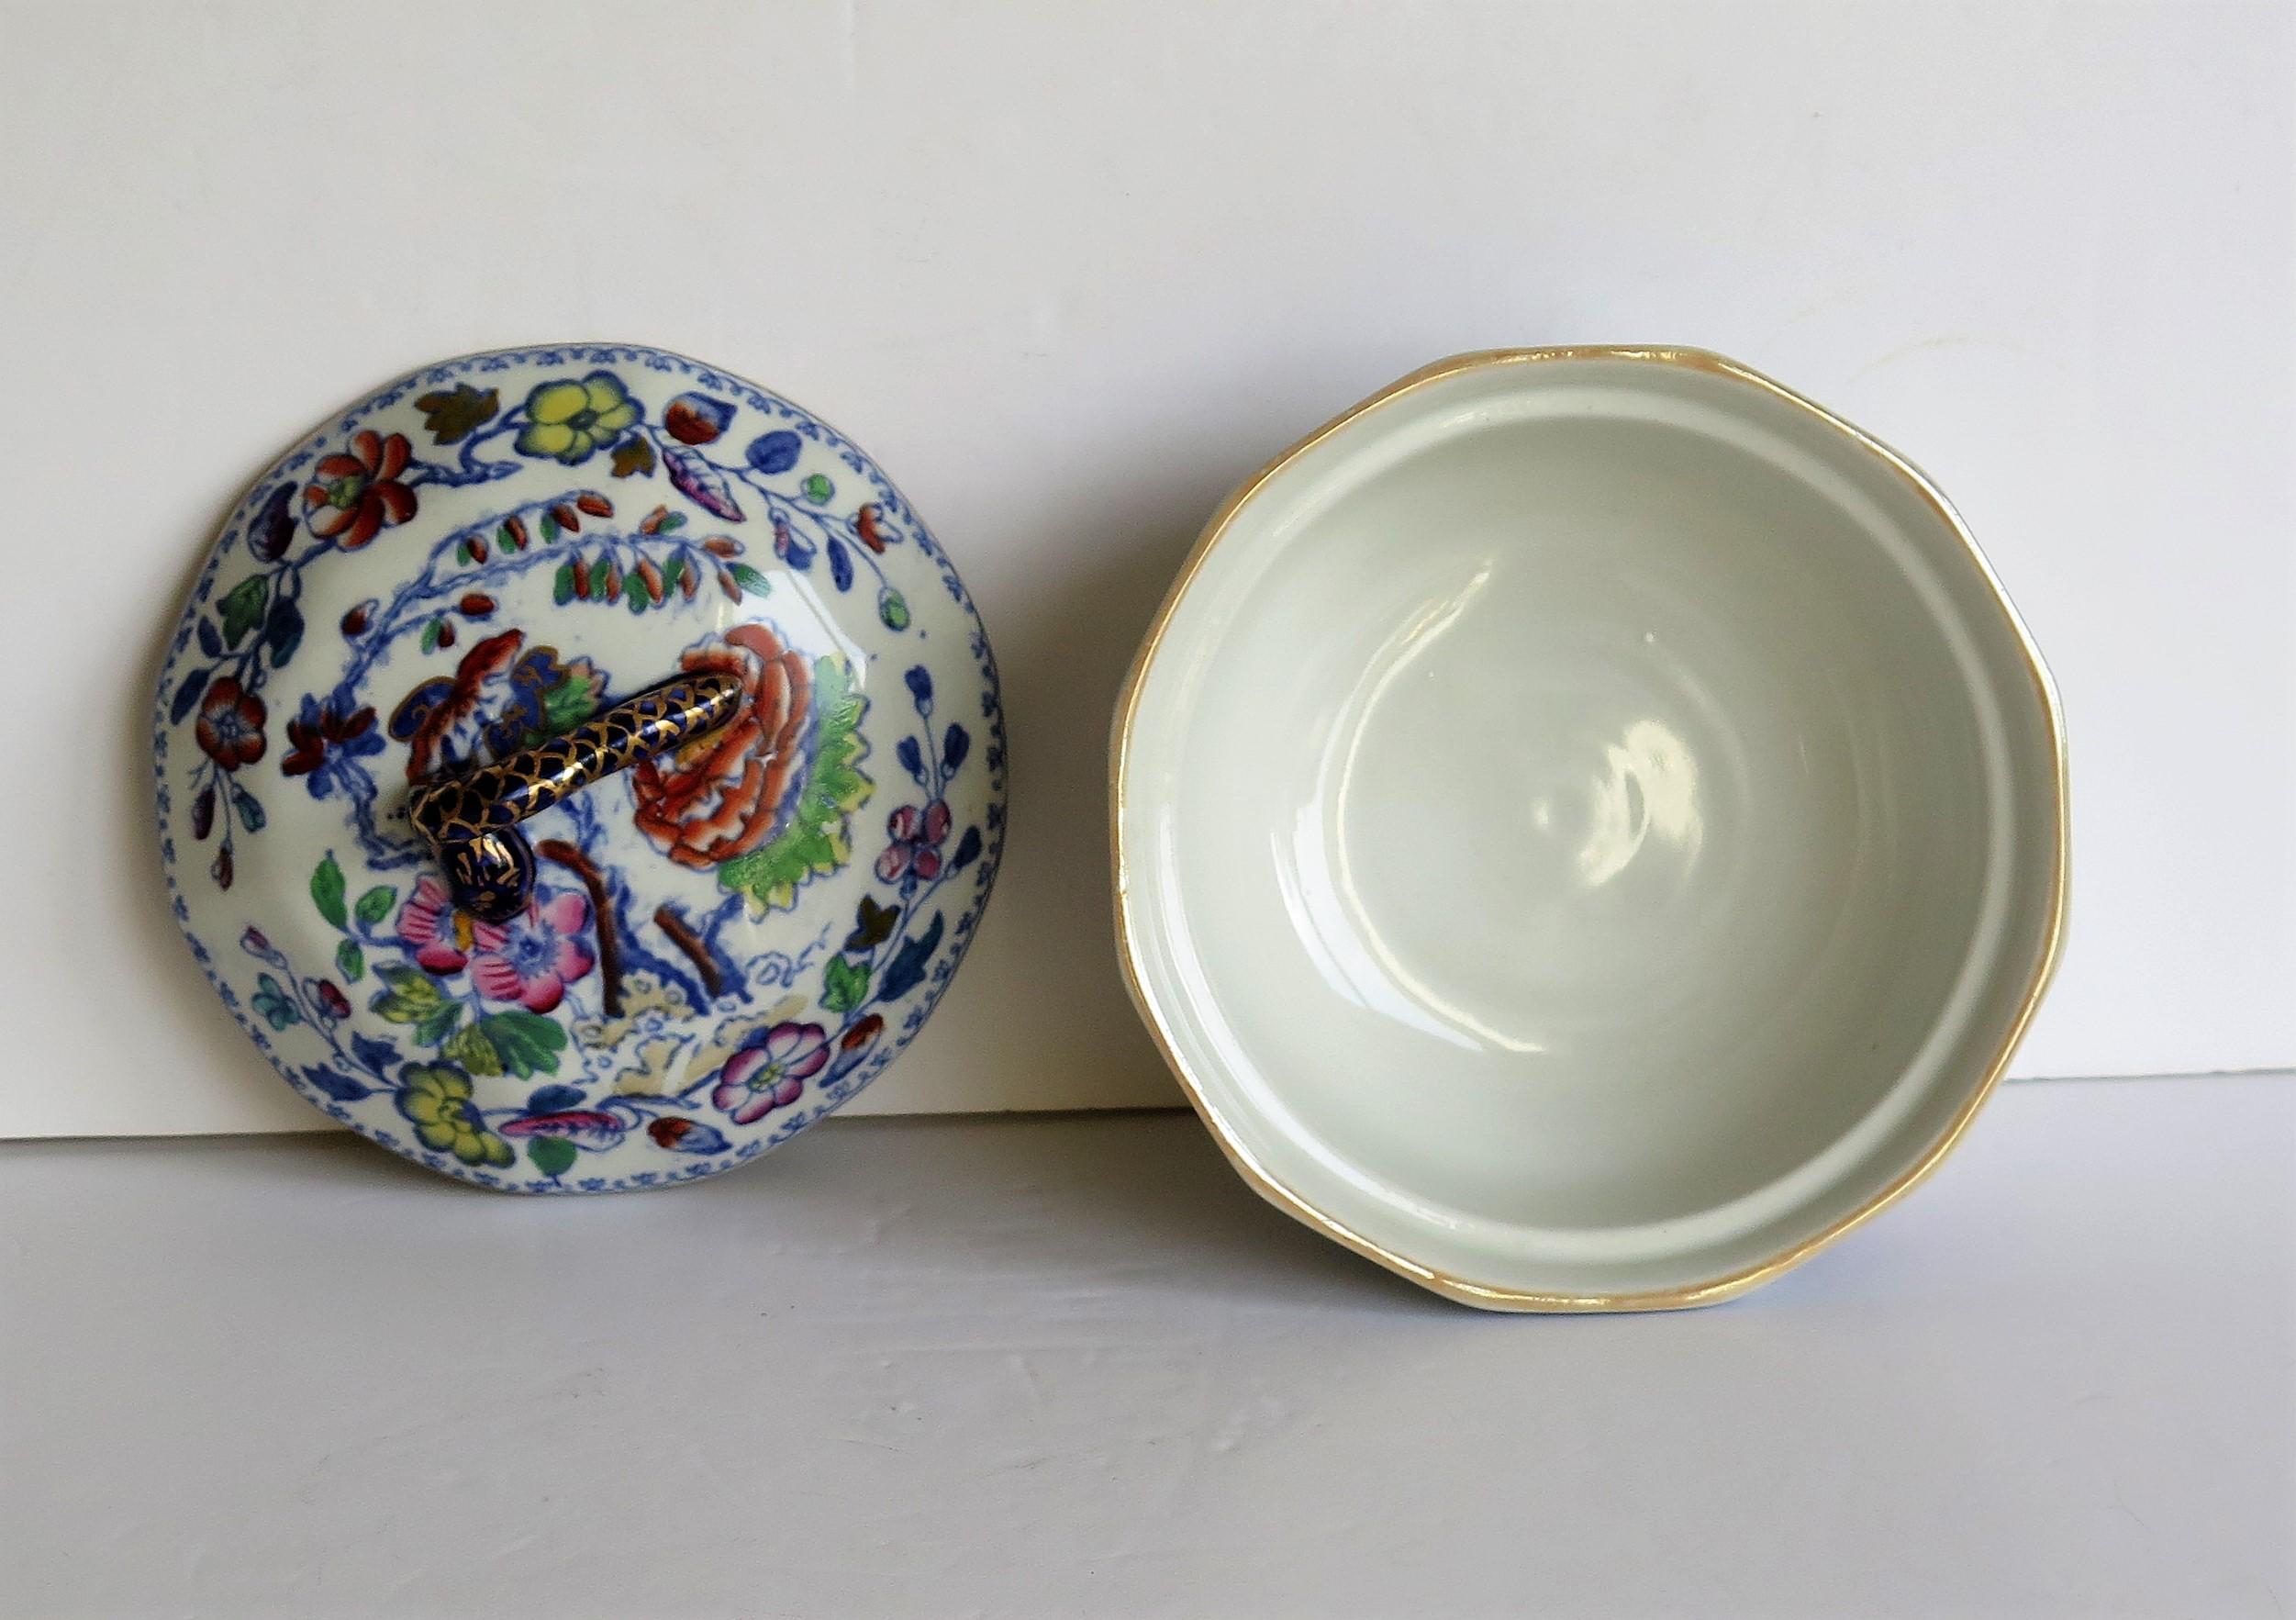 Mason's Ironstone Lidded Dish or Bowl in Flying Bird Pattern, circa 1890 For Sale 2